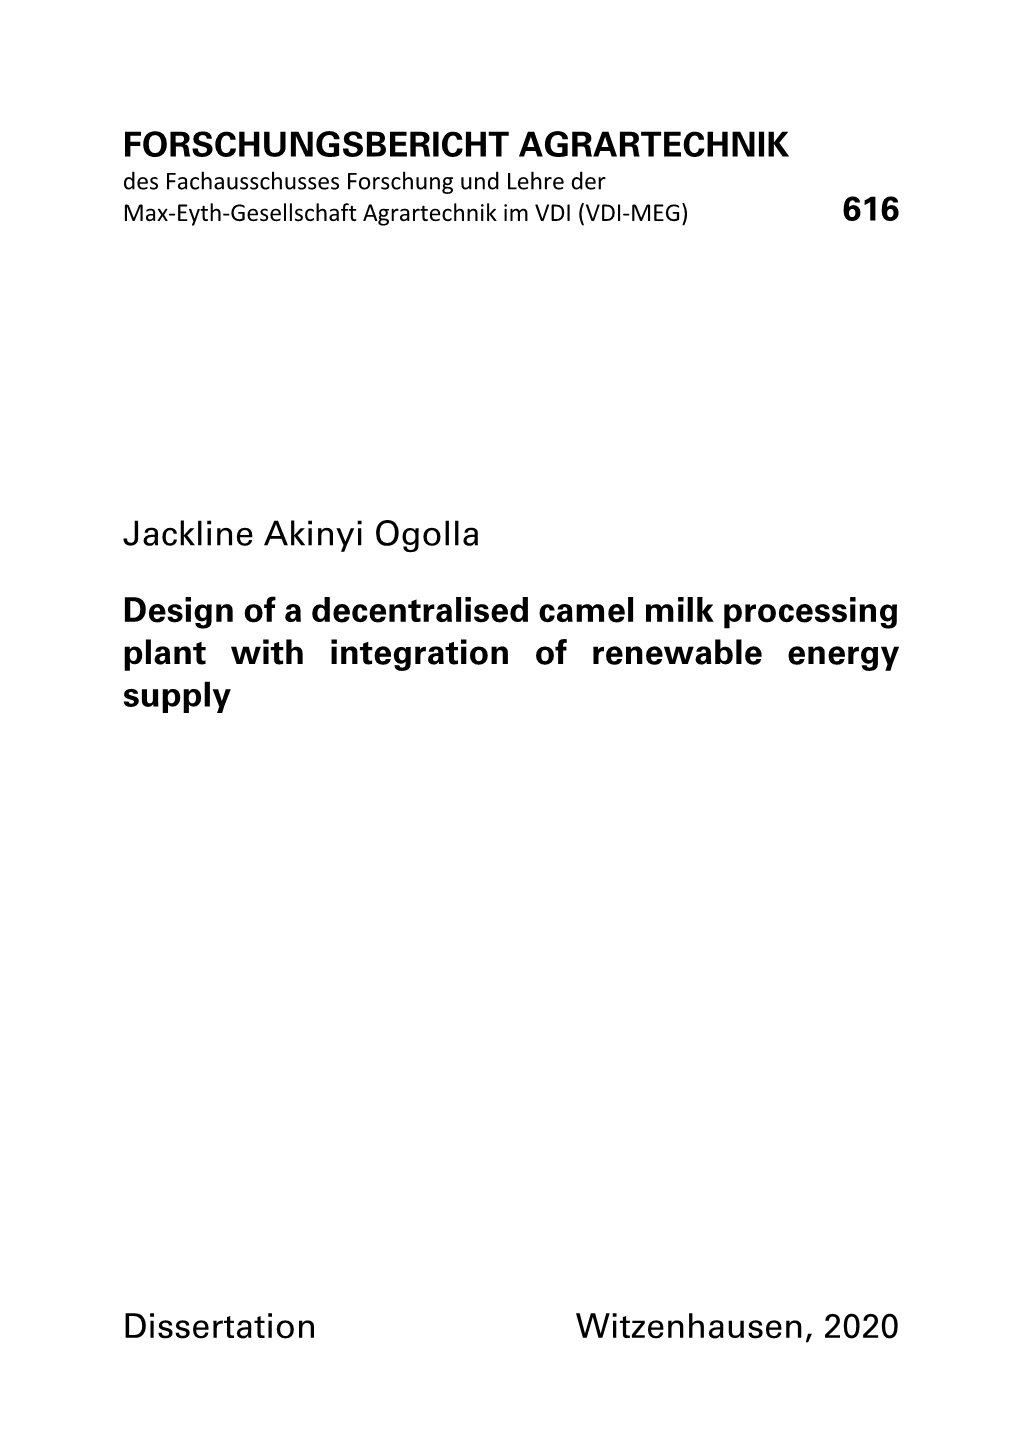 Design of a Decentralised Camel Milk Processing Plant with Integration of Renewable Energy Supply